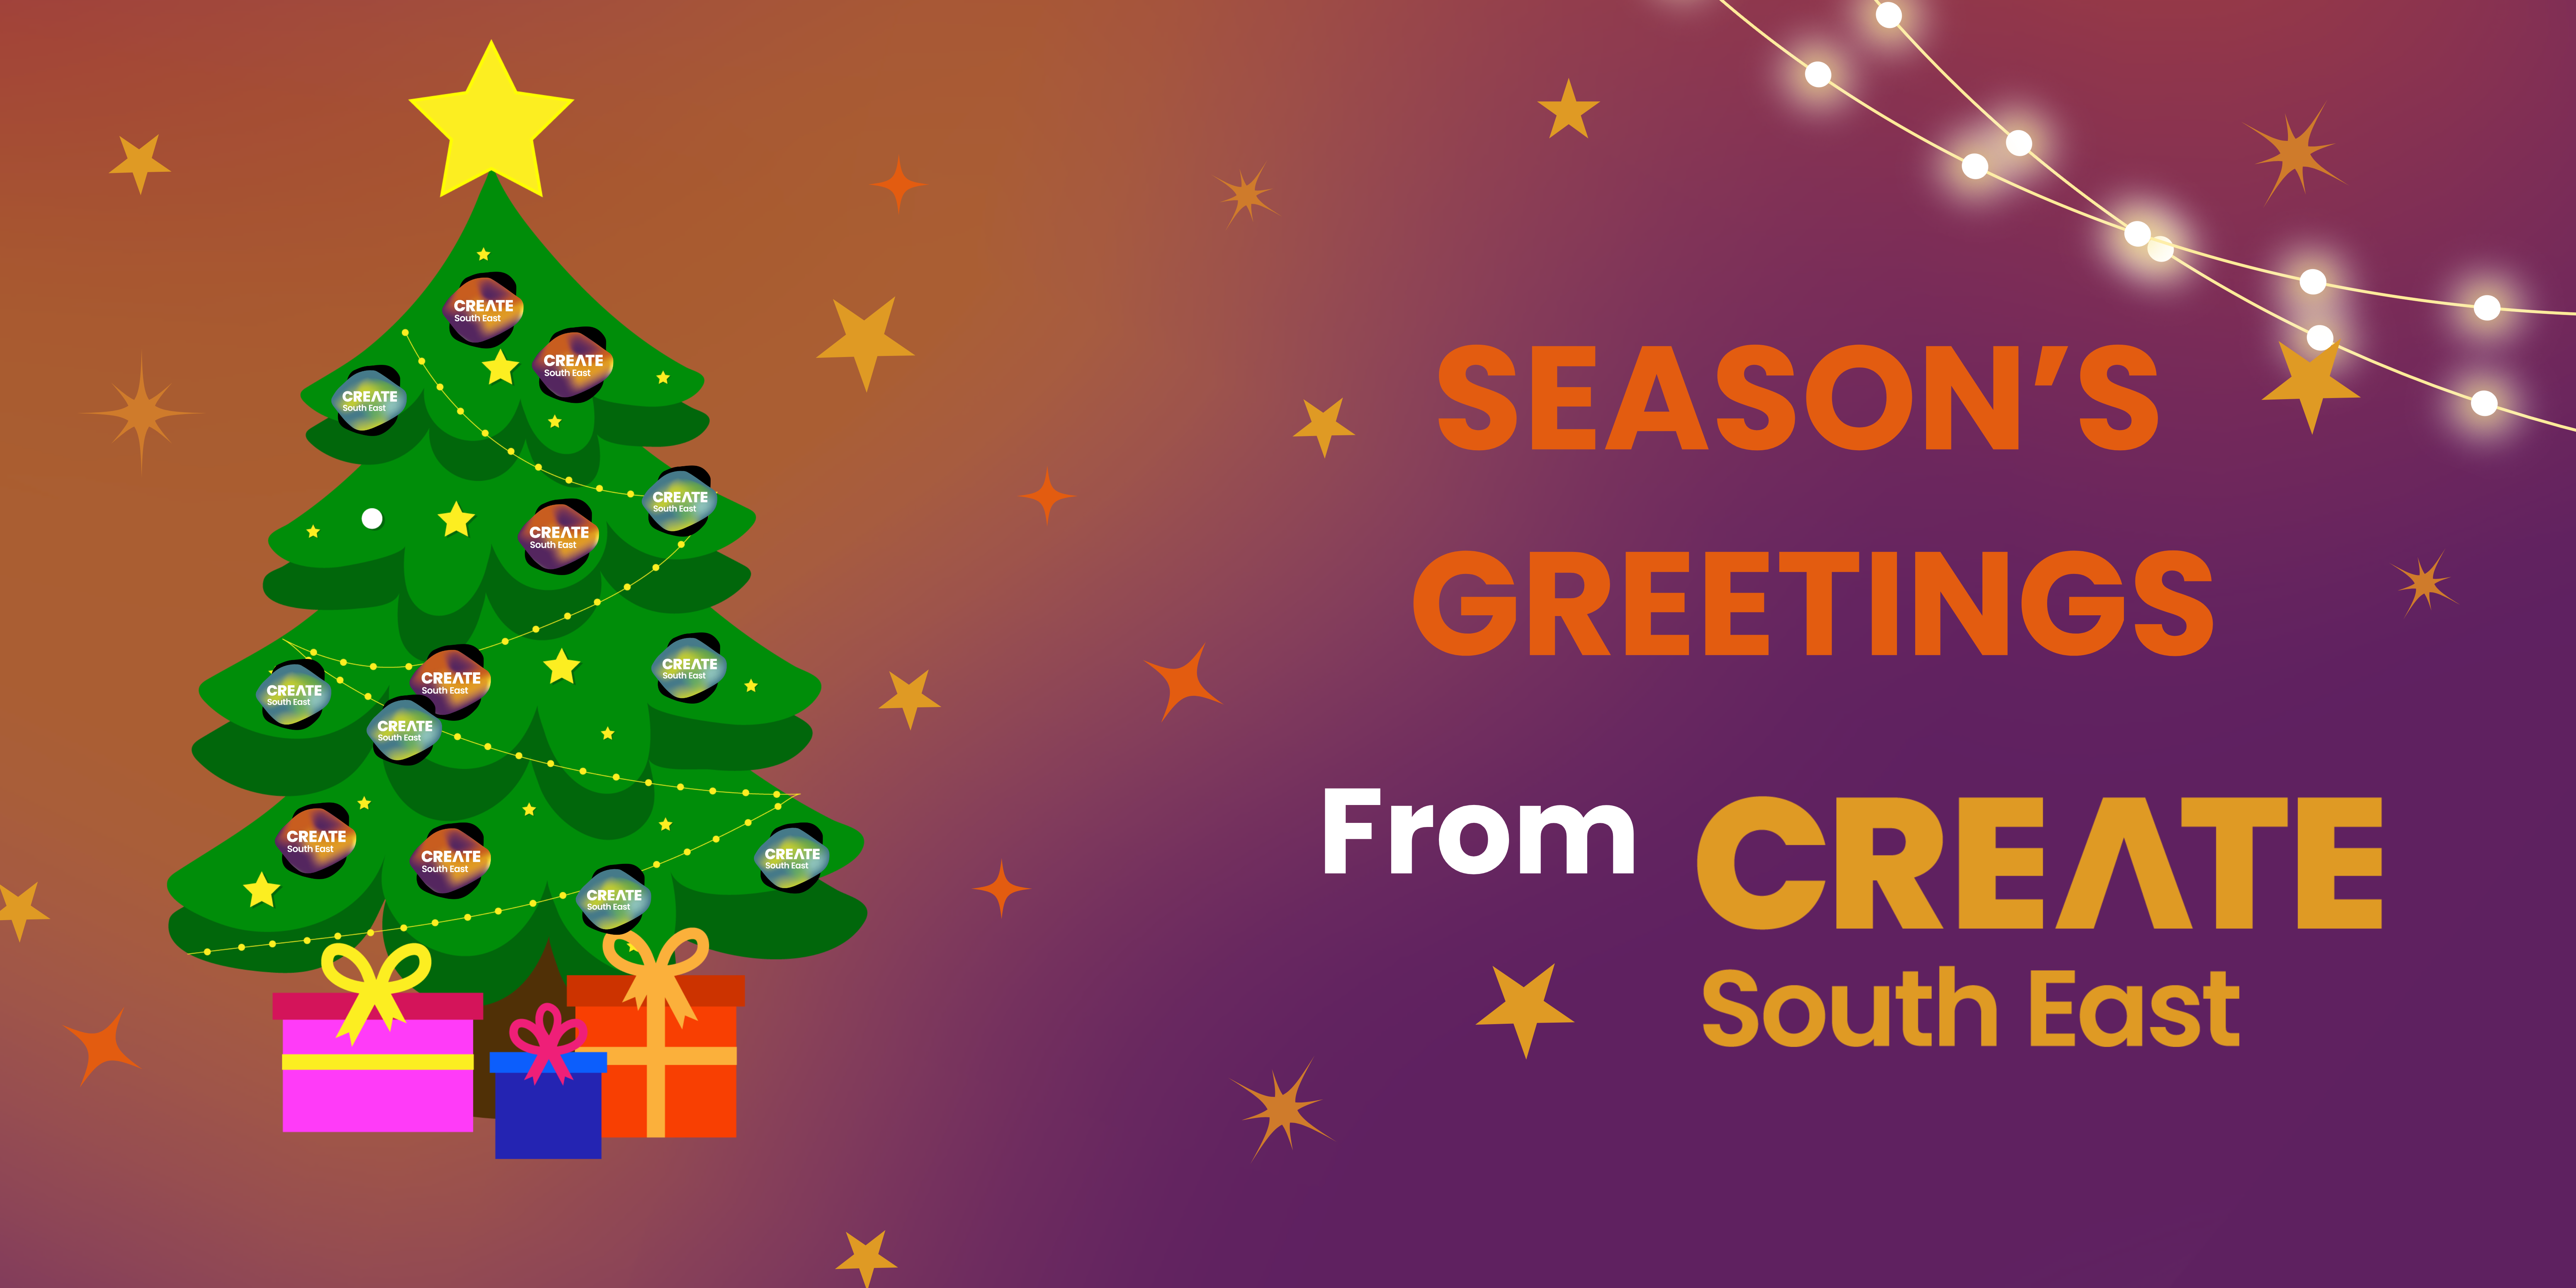 Season’s Greetings from the Create South East Team!